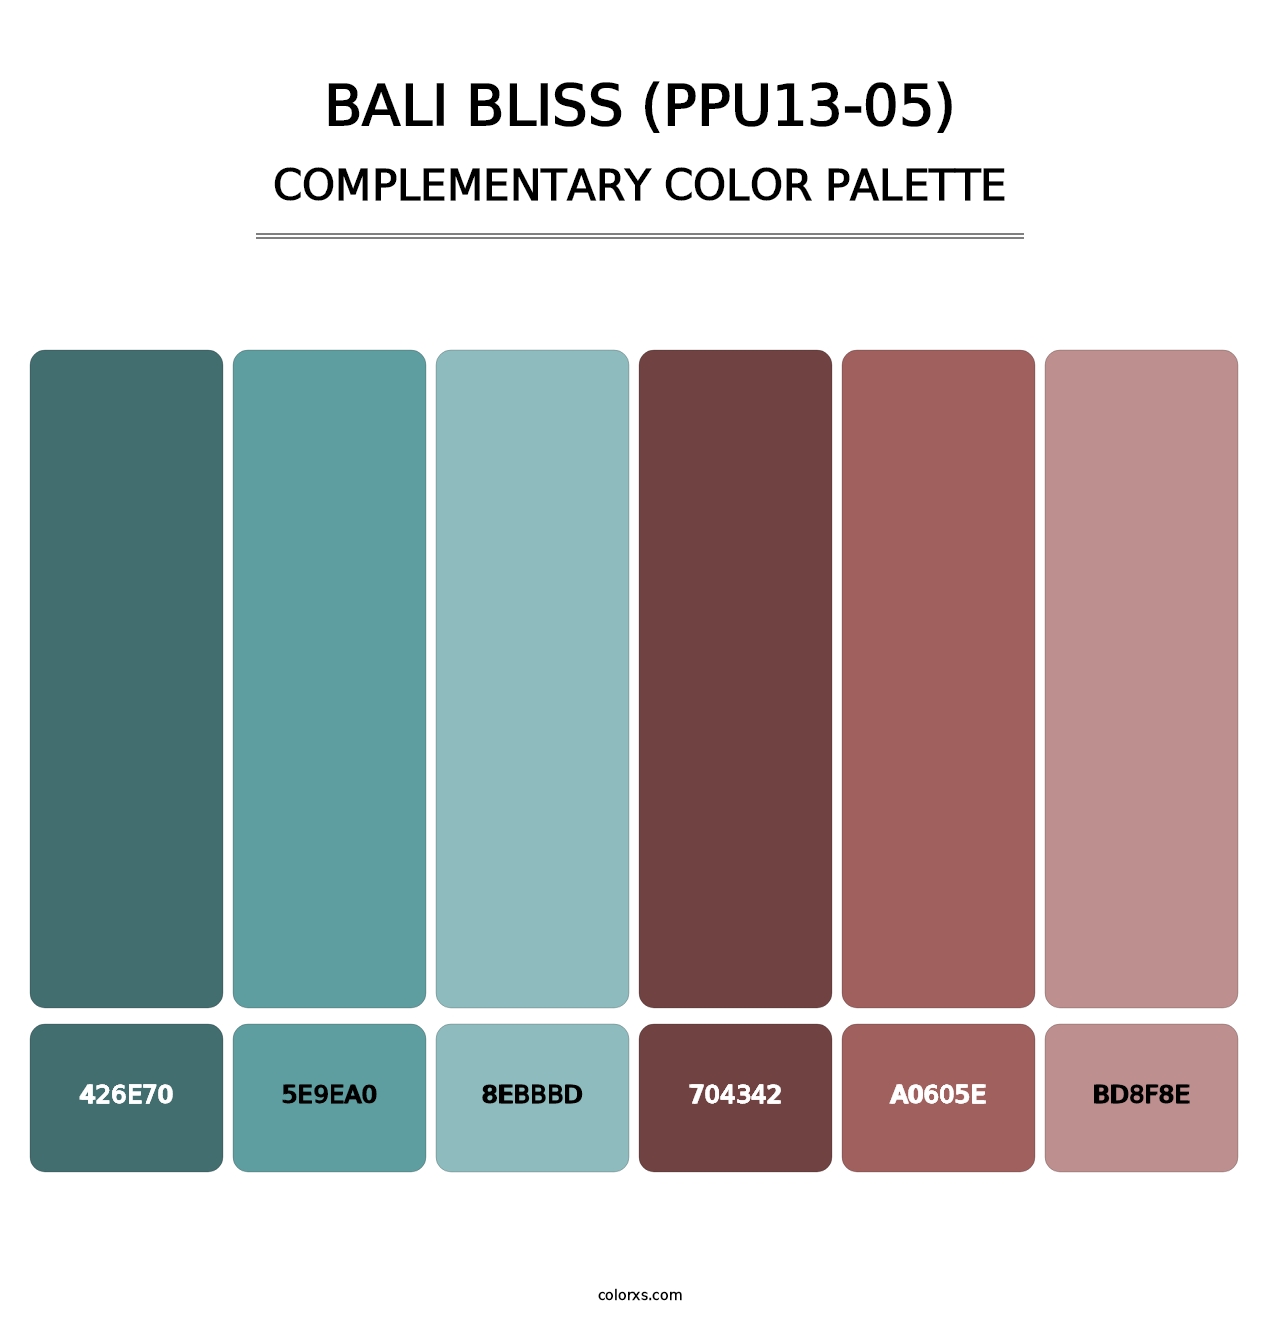 Bali Bliss (PPU13-05) - Complementary Color Palette